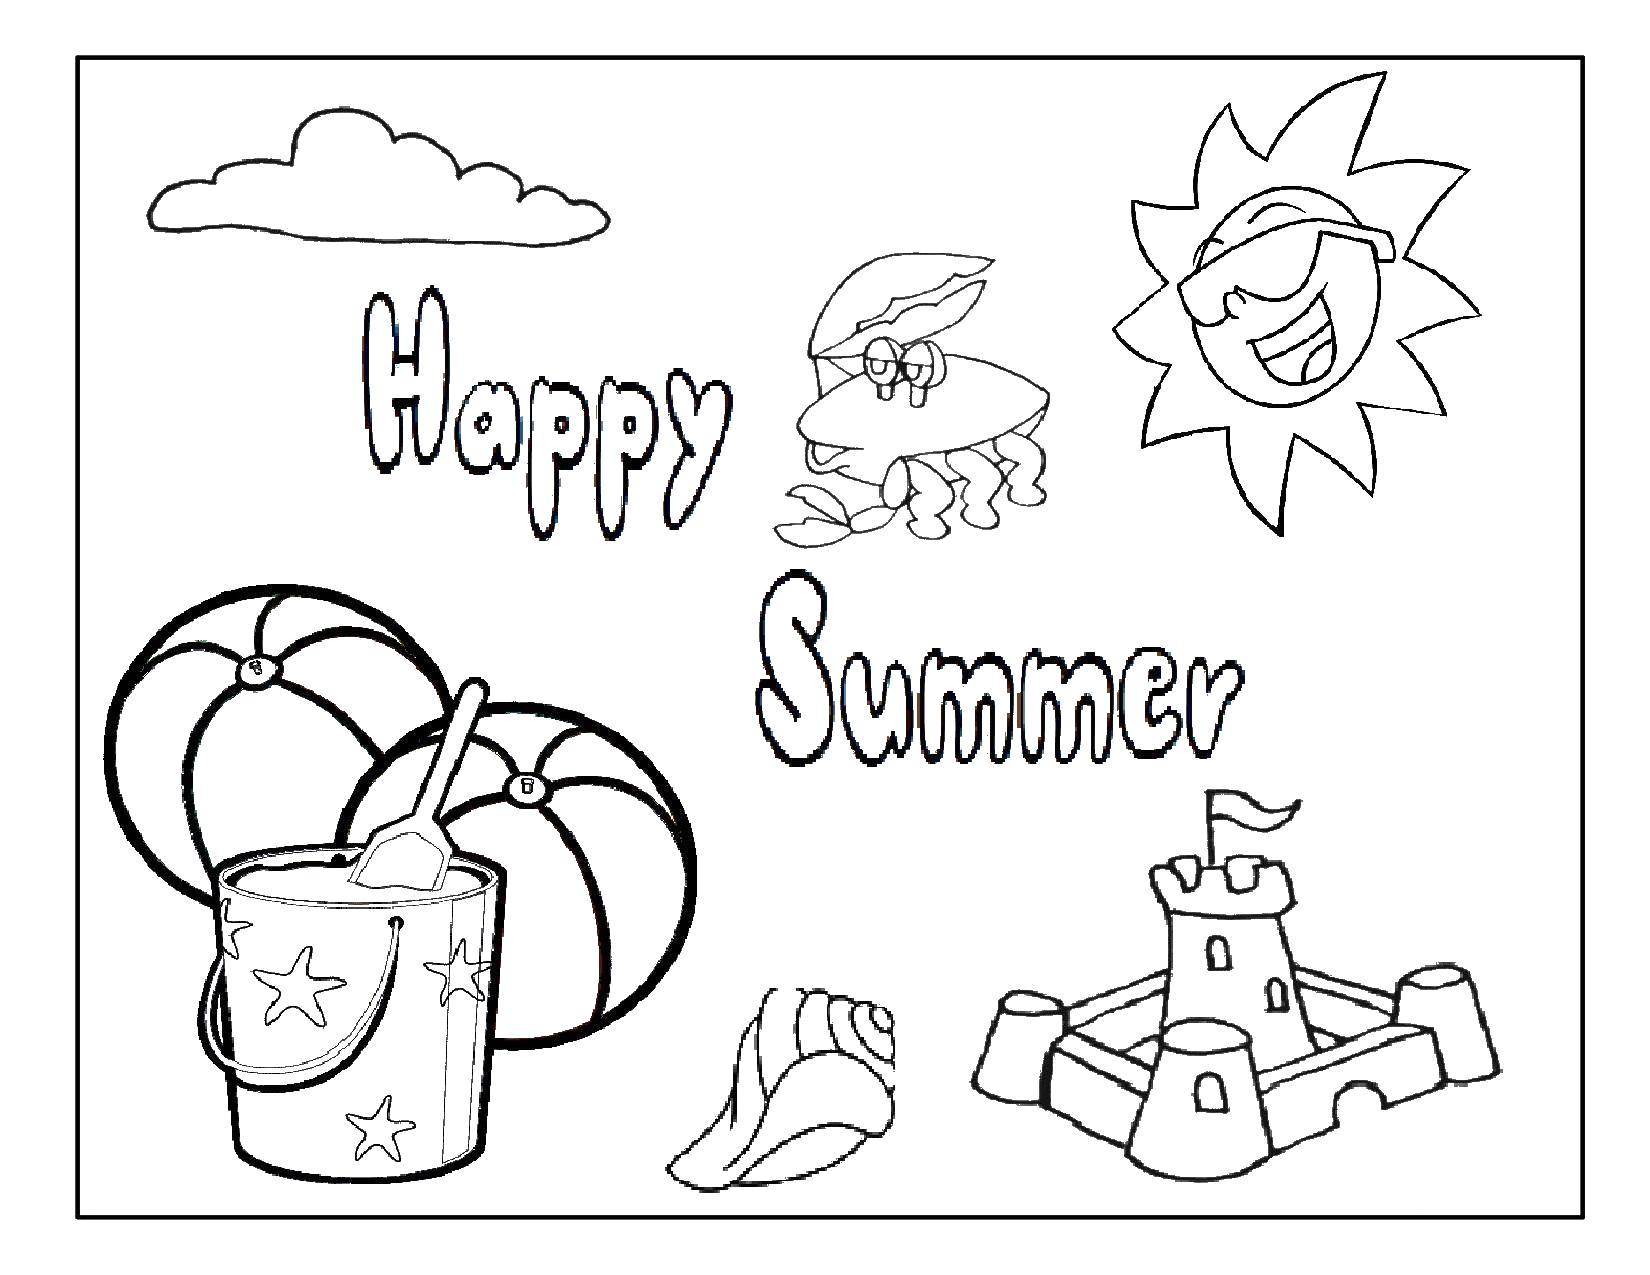 Coloring Happy summer. Category Summer fun. Tags:  Summer, beach, vacation, fun, underwater world.